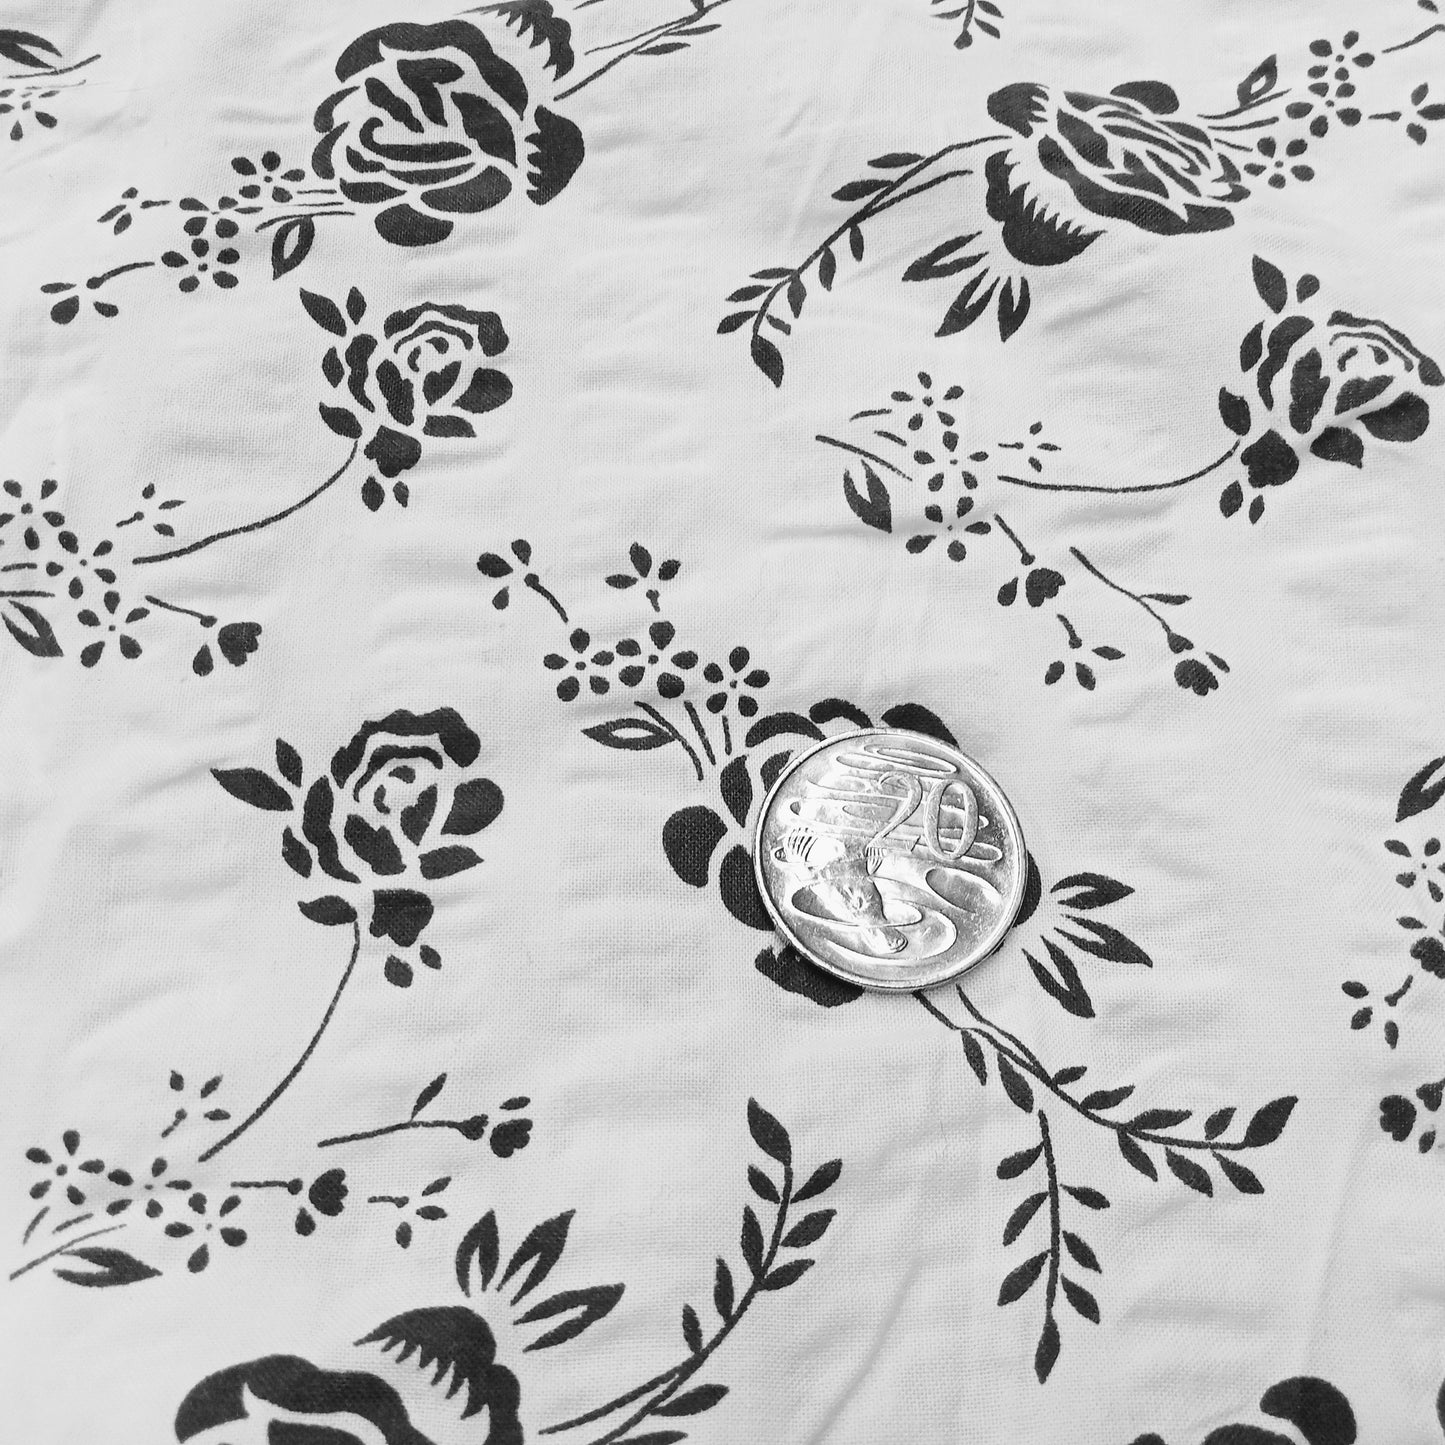 Black & white floral printed fabric - 2mtrs